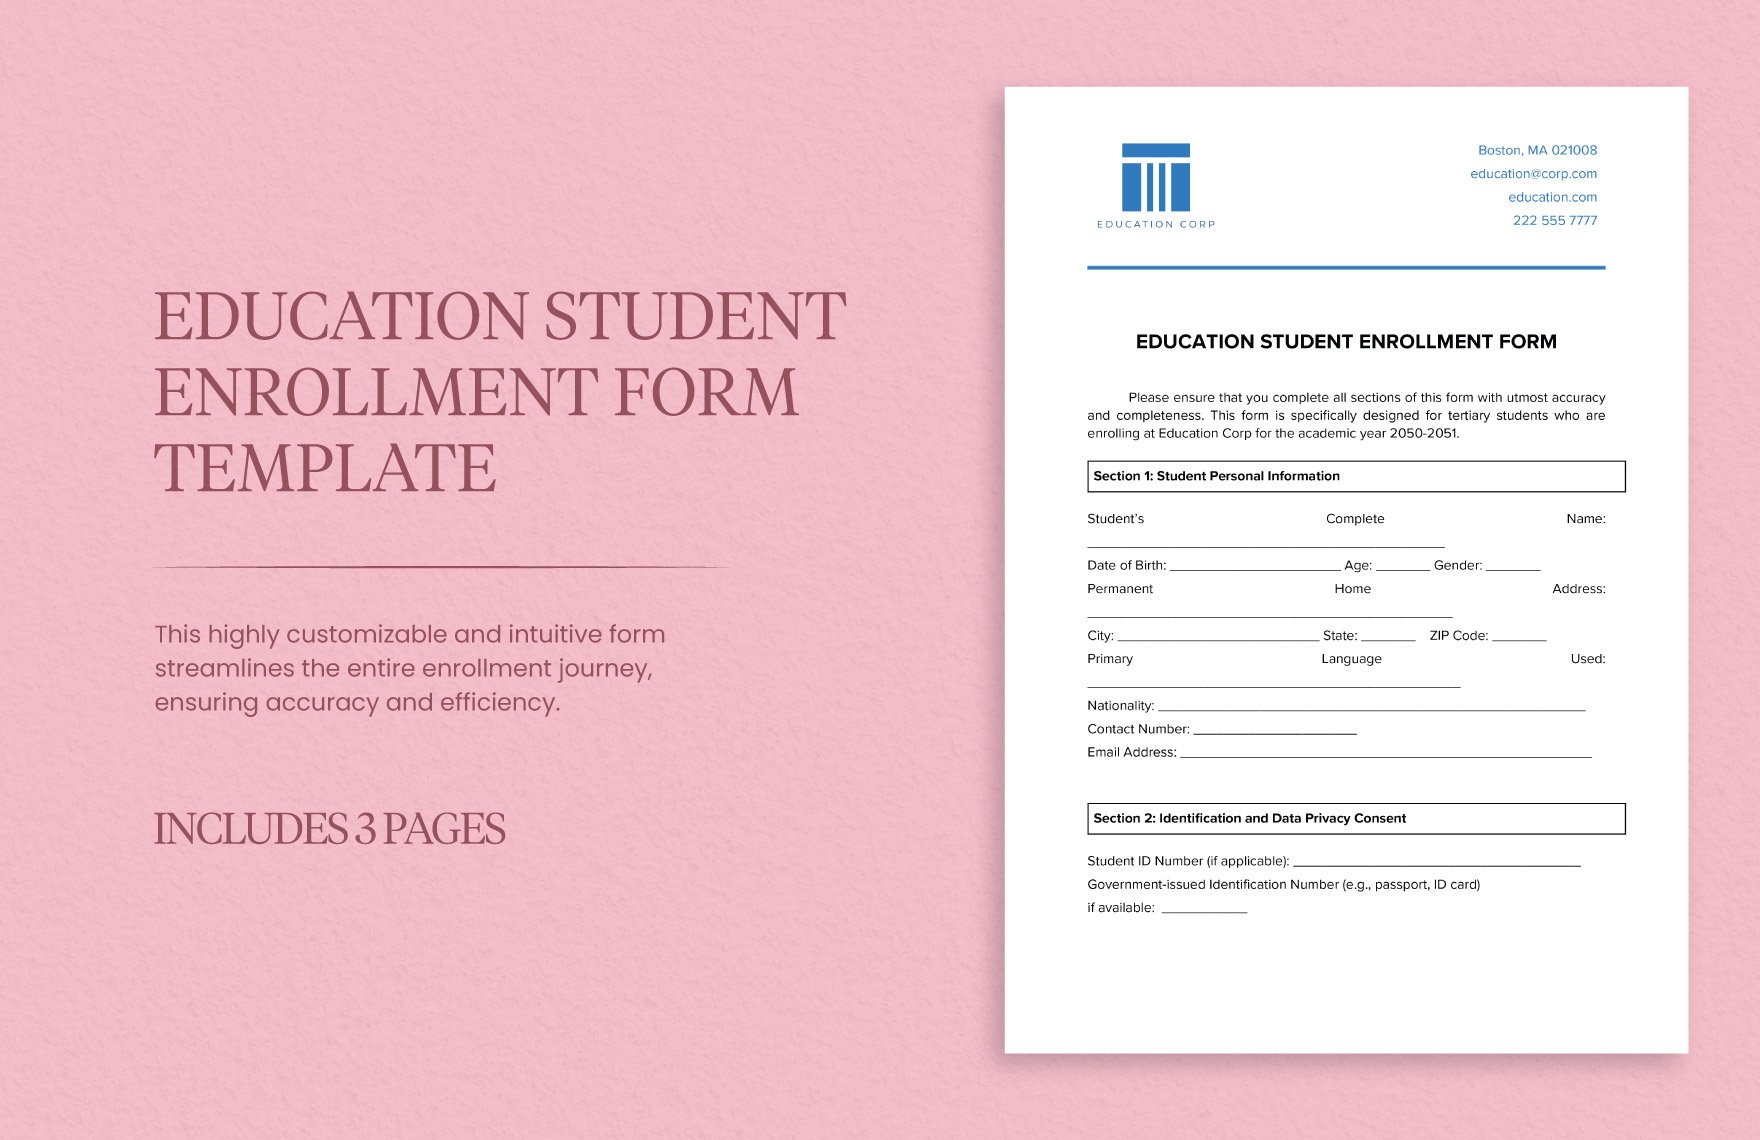 Education Student Enrollment Form Template in Word, Google Docs, PDF